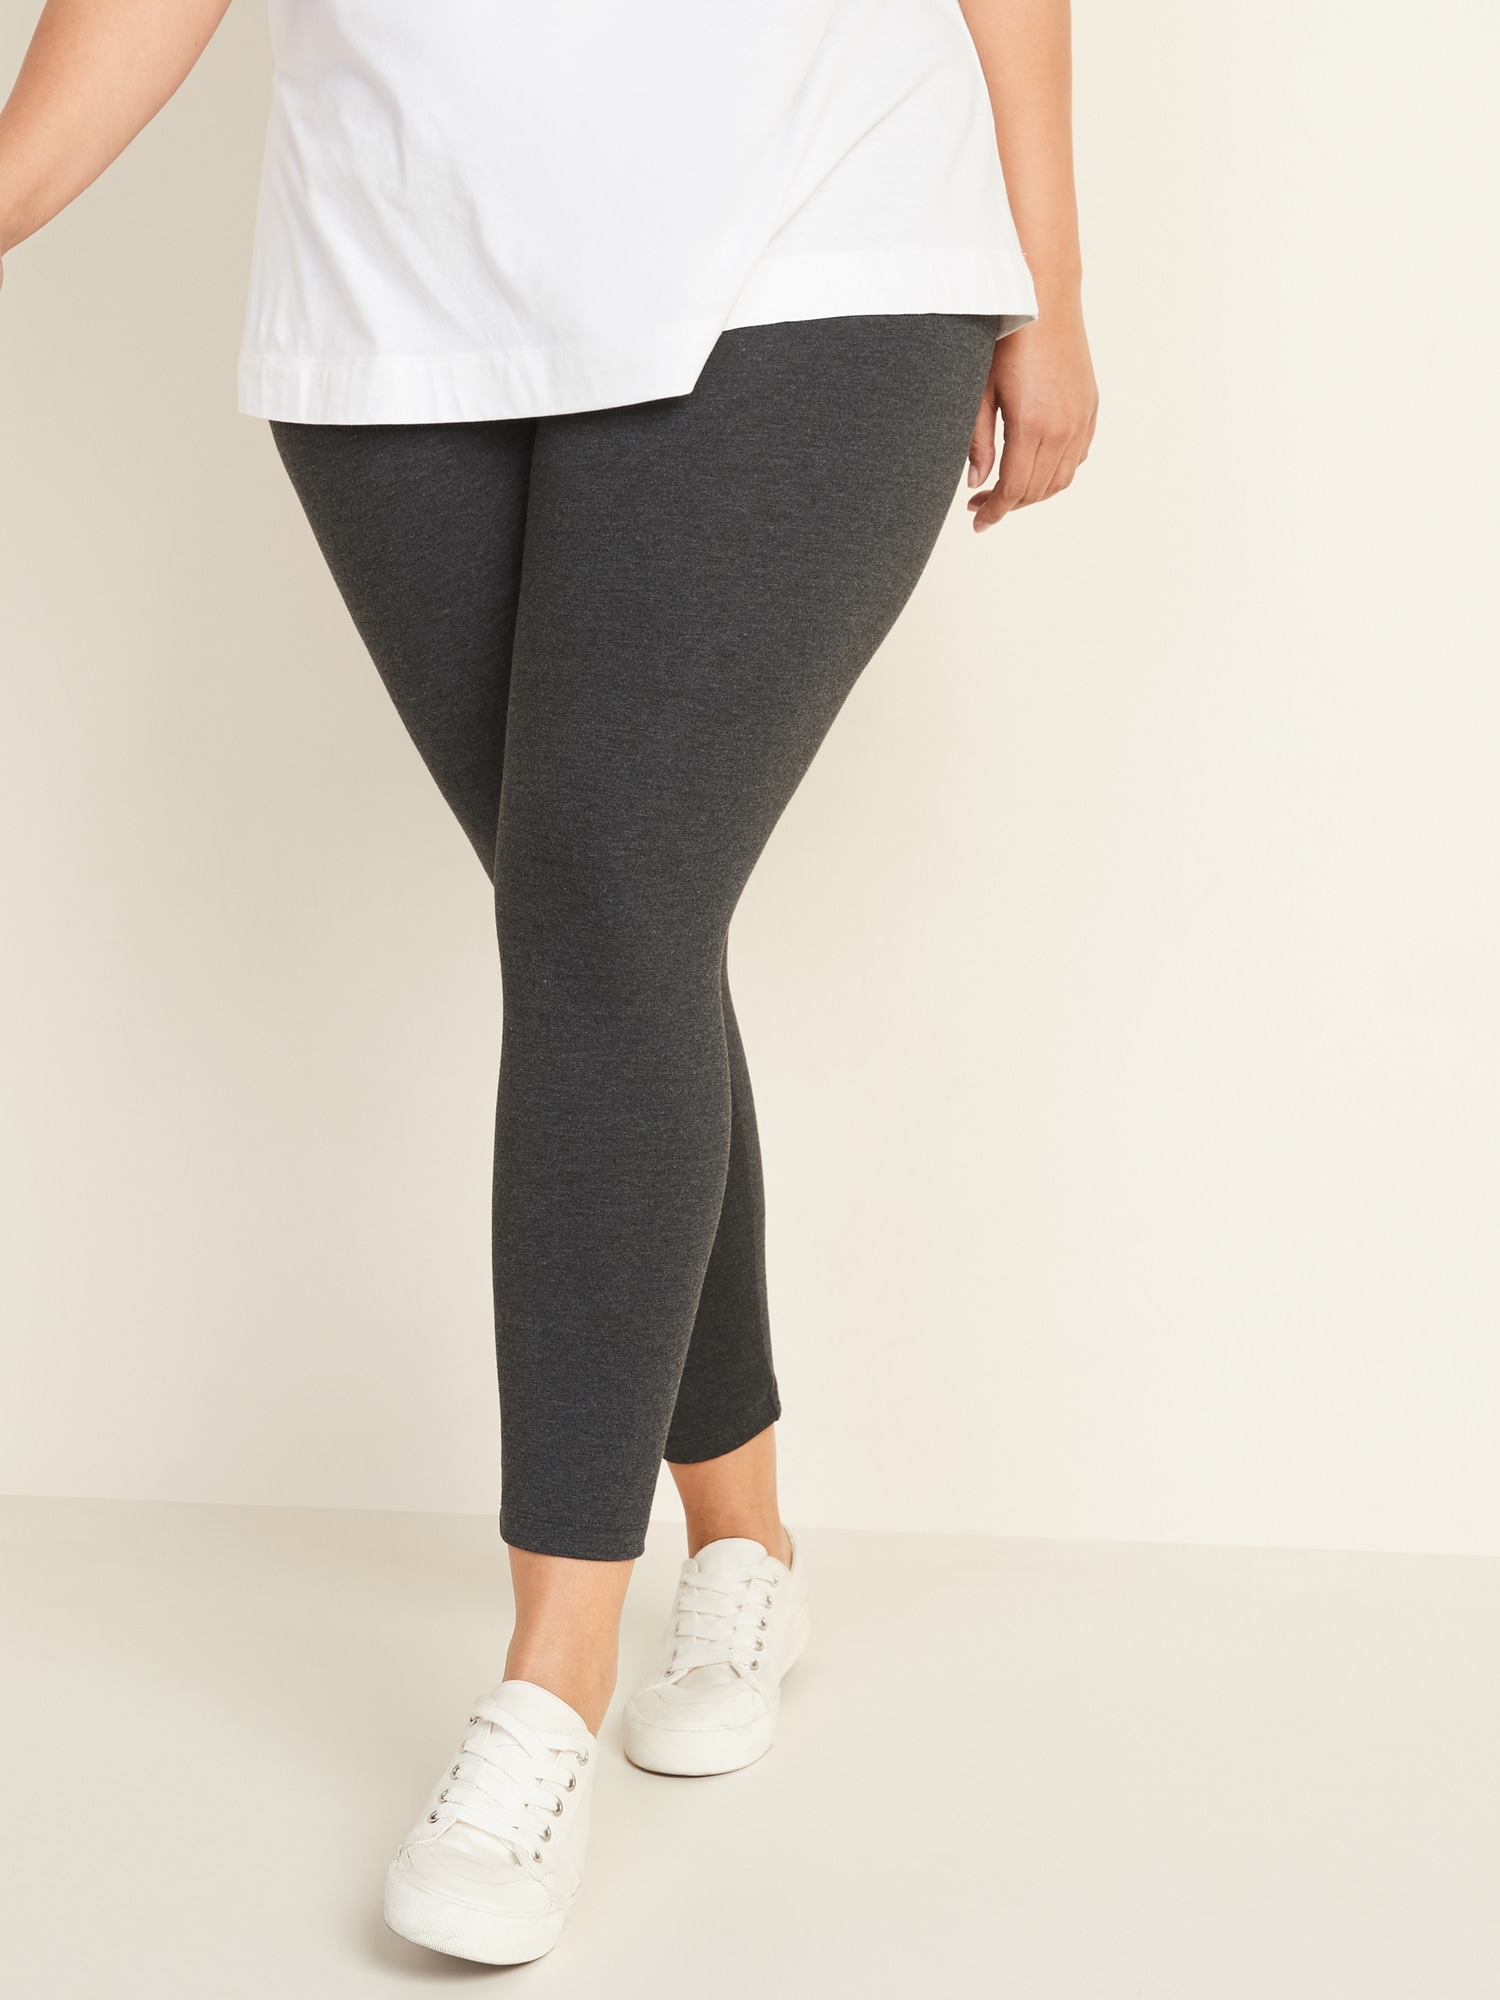 Old Navy Navy Blue Leggings Size 2X (Plus) - 26% off